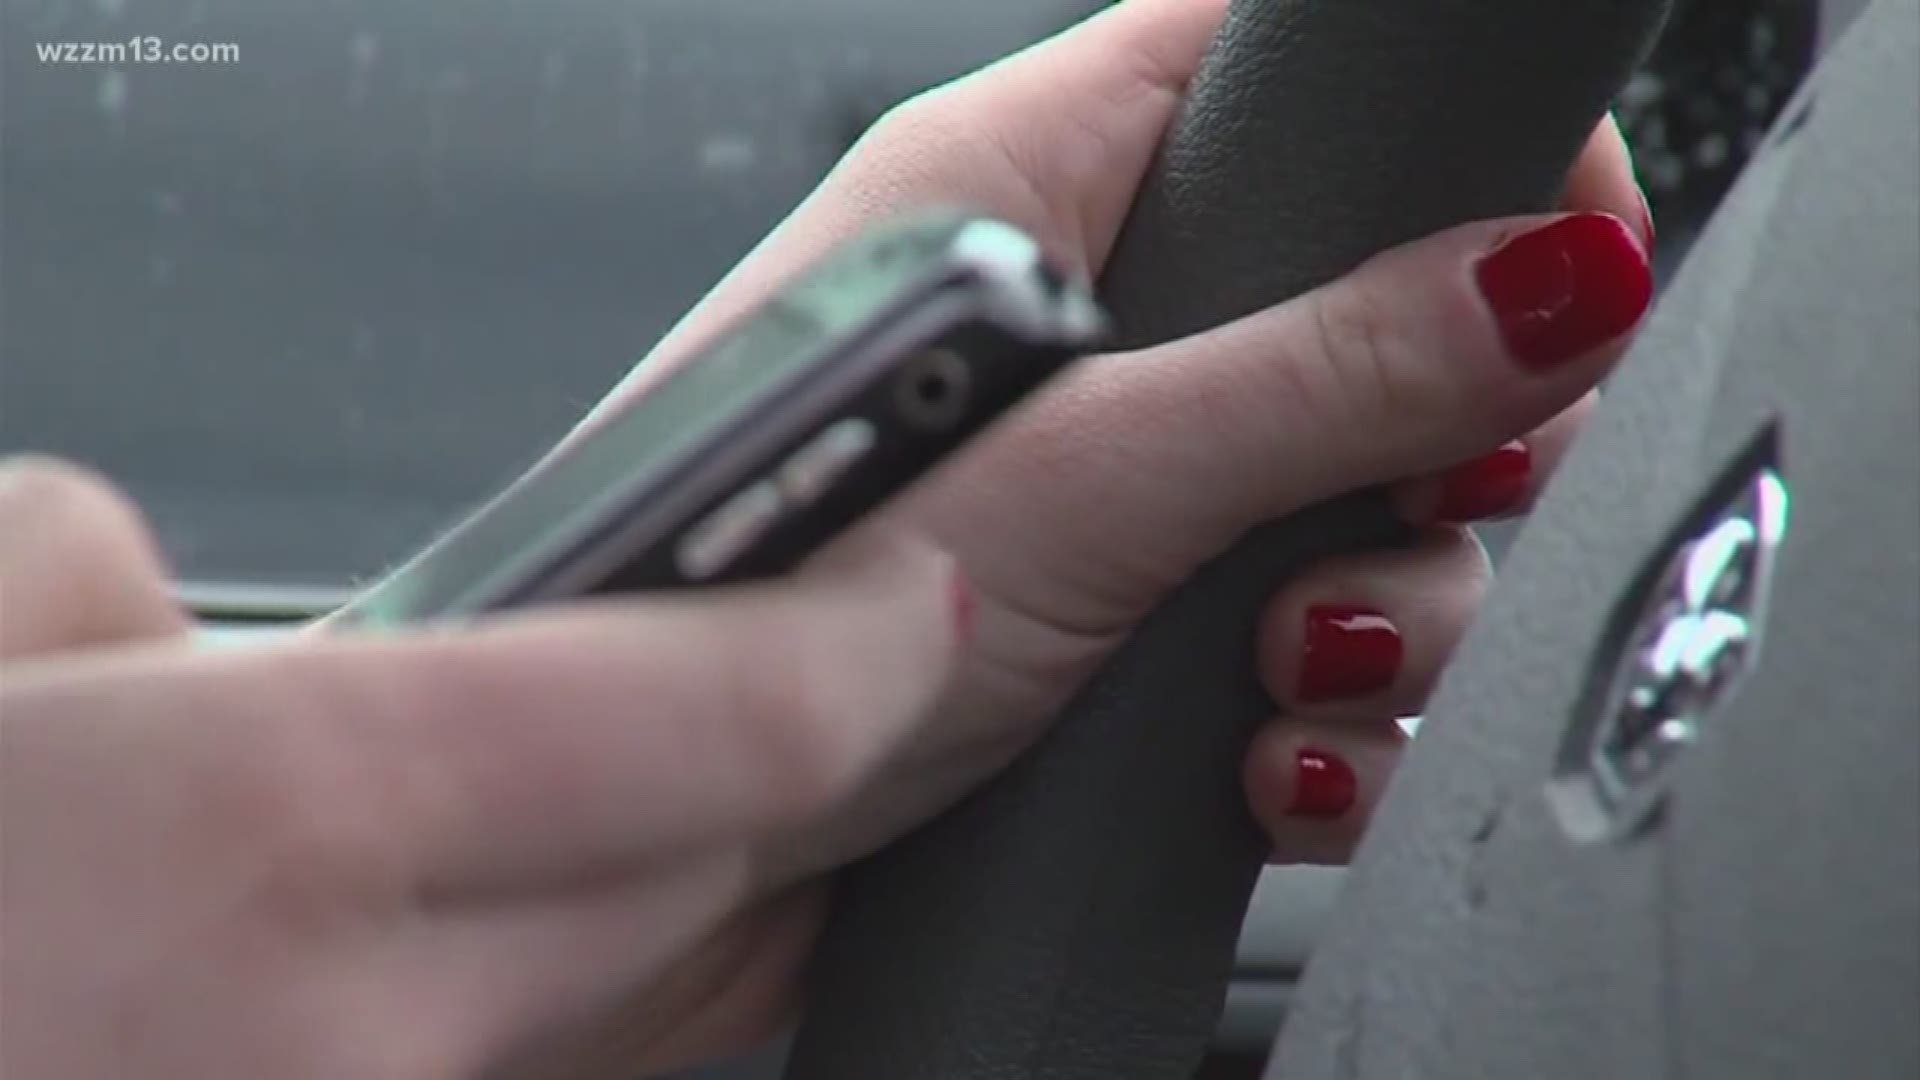 Lawmakers push distracted driving bill